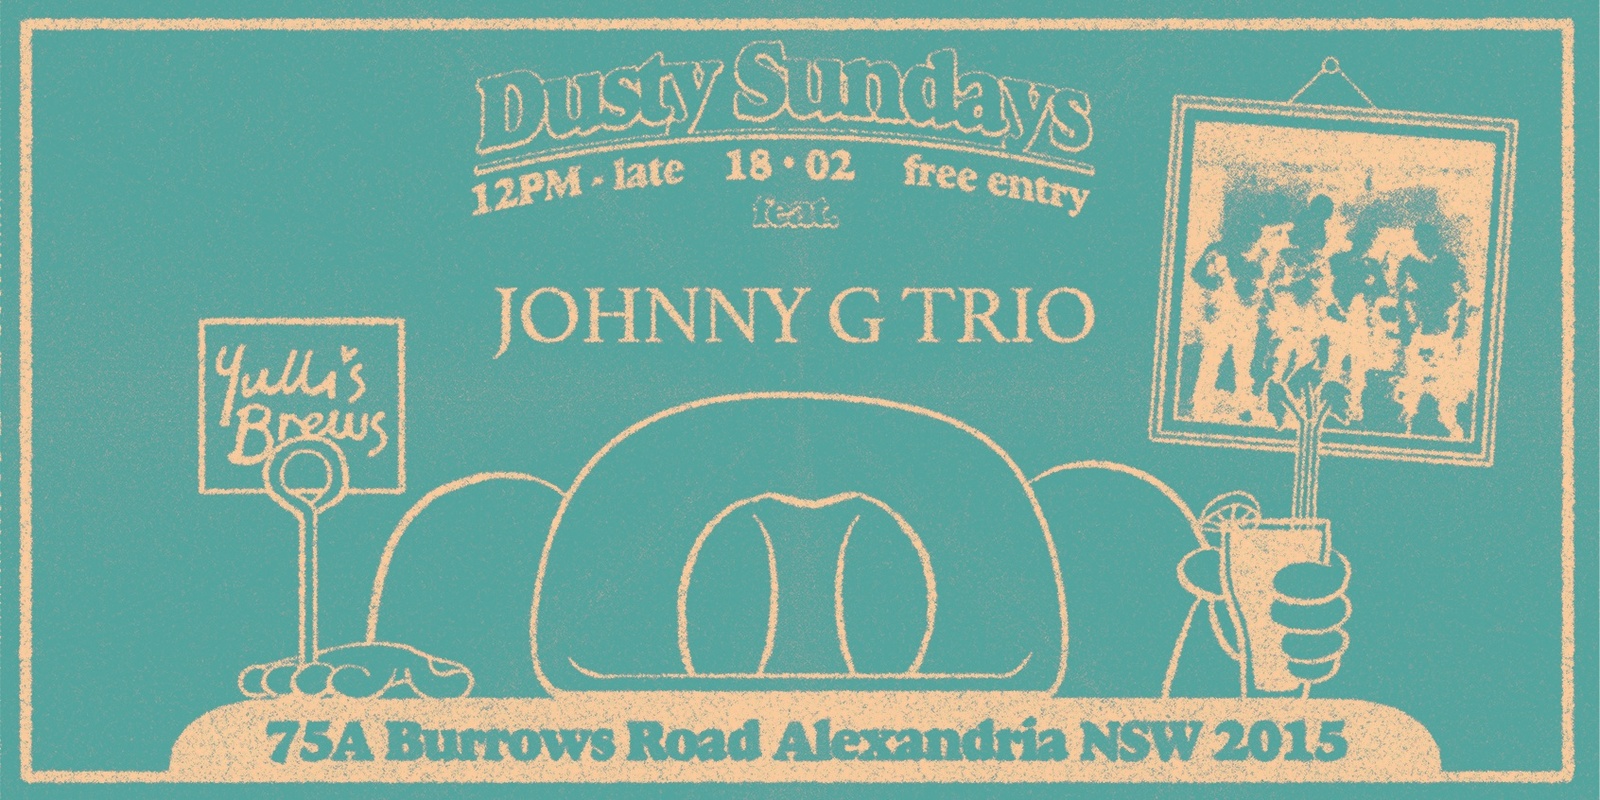 Banner image for DUSTY SUNDAYS - Johnny G Trio